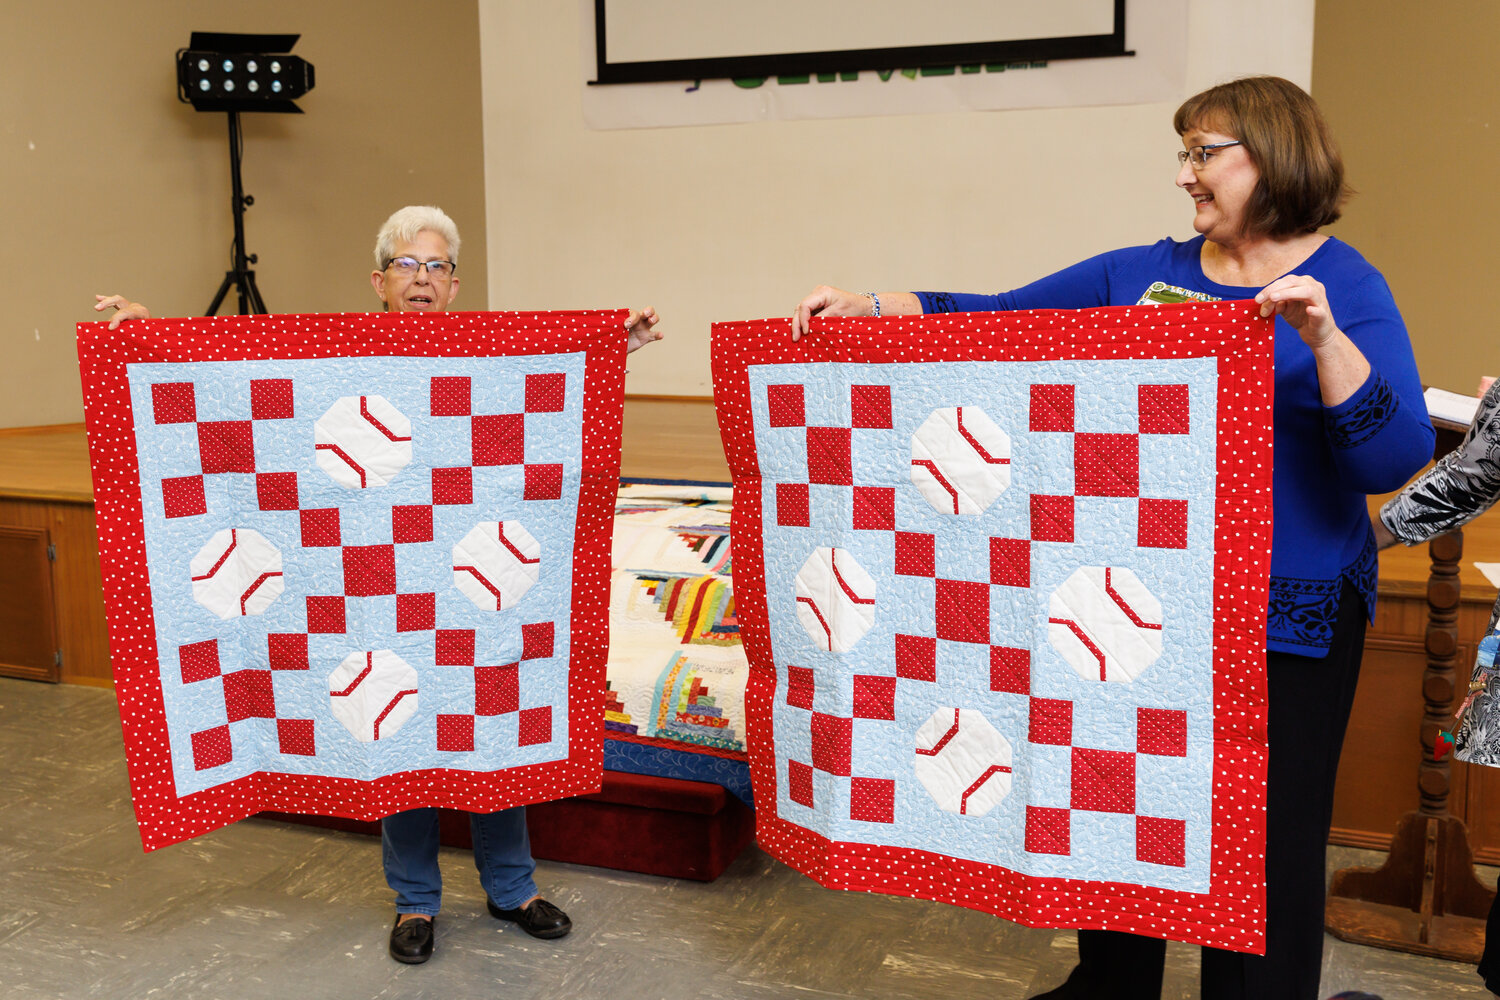 Debby Grice (right) assists Sona Molder in displaying a dual set of quilts she made for the NICU. Photo: Tony Wooten